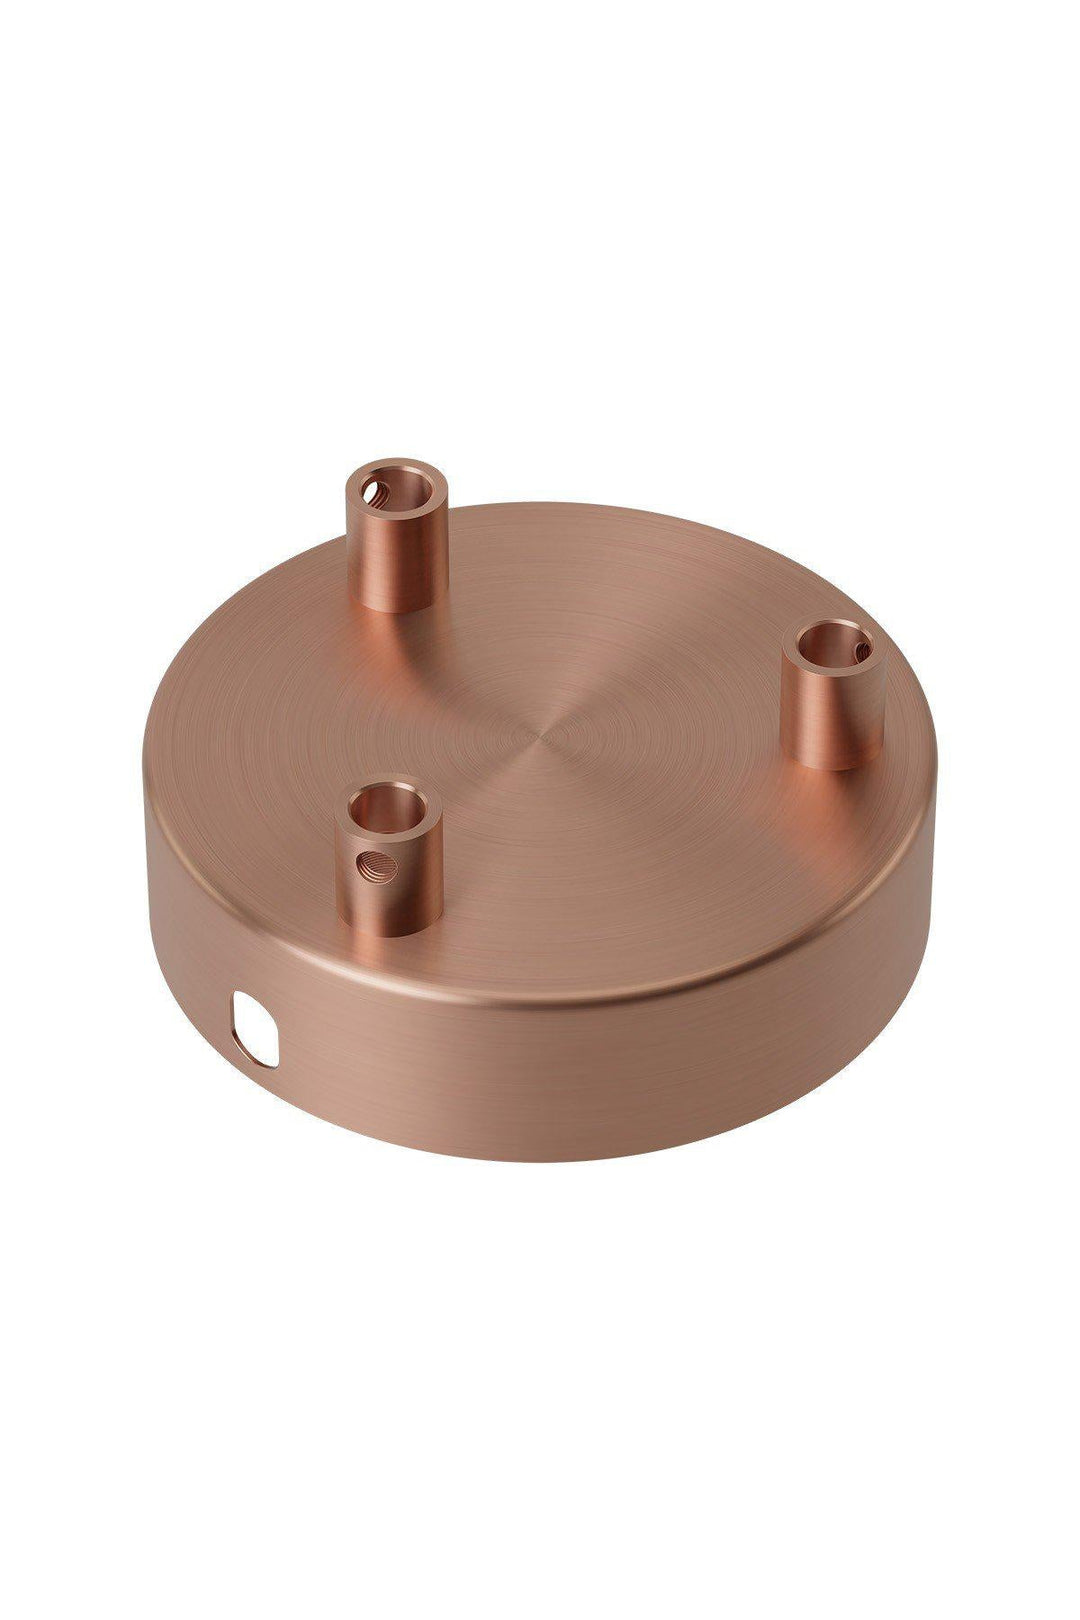 Calex Metal Ceiling Rose With 3 Holes Satin Copper - 940048